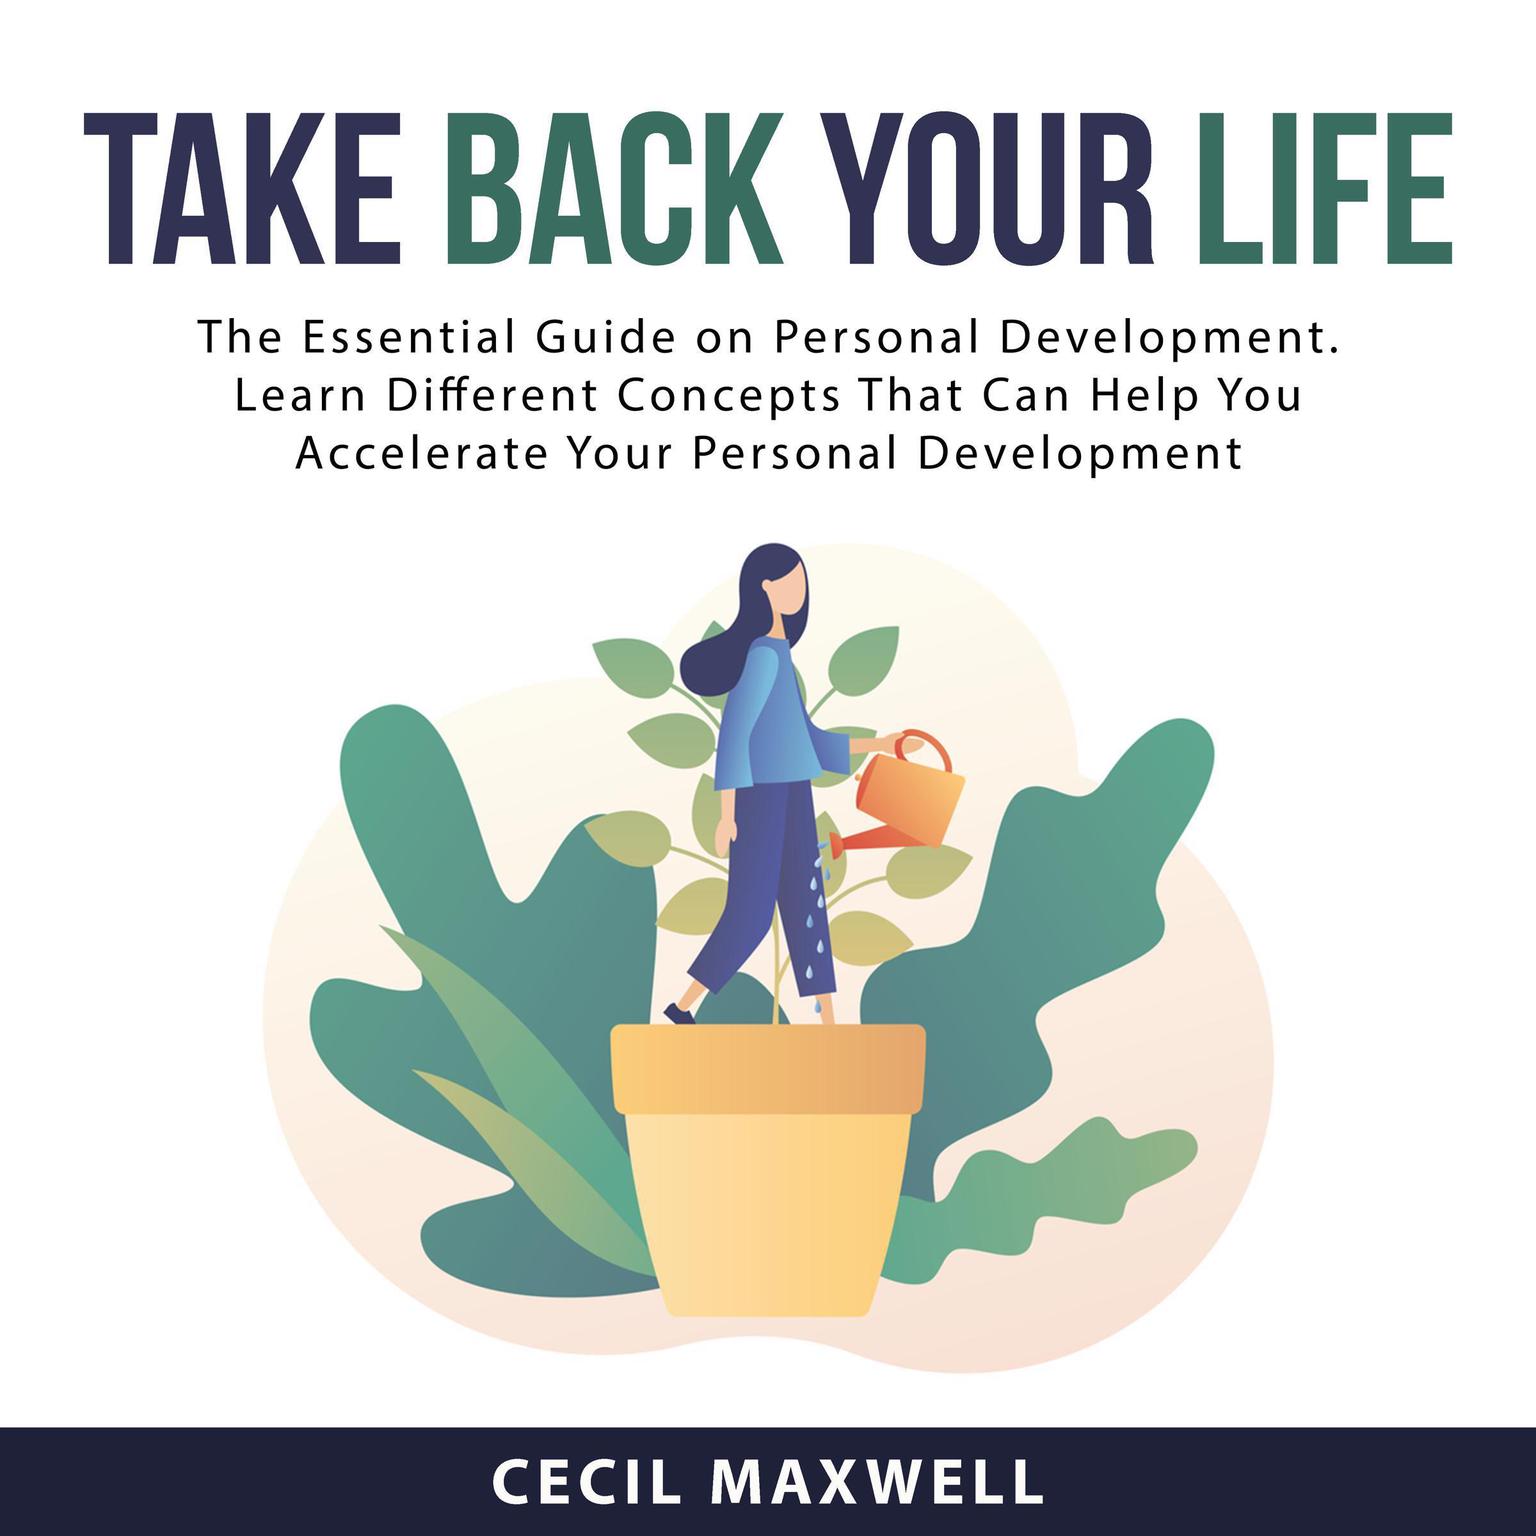 Take Back Your Life: The Essential Guide on Personal Development. Learn Different Concepts That Can Help You Accelerate Your Personal Development Audiobook, by Cecil Maxwell